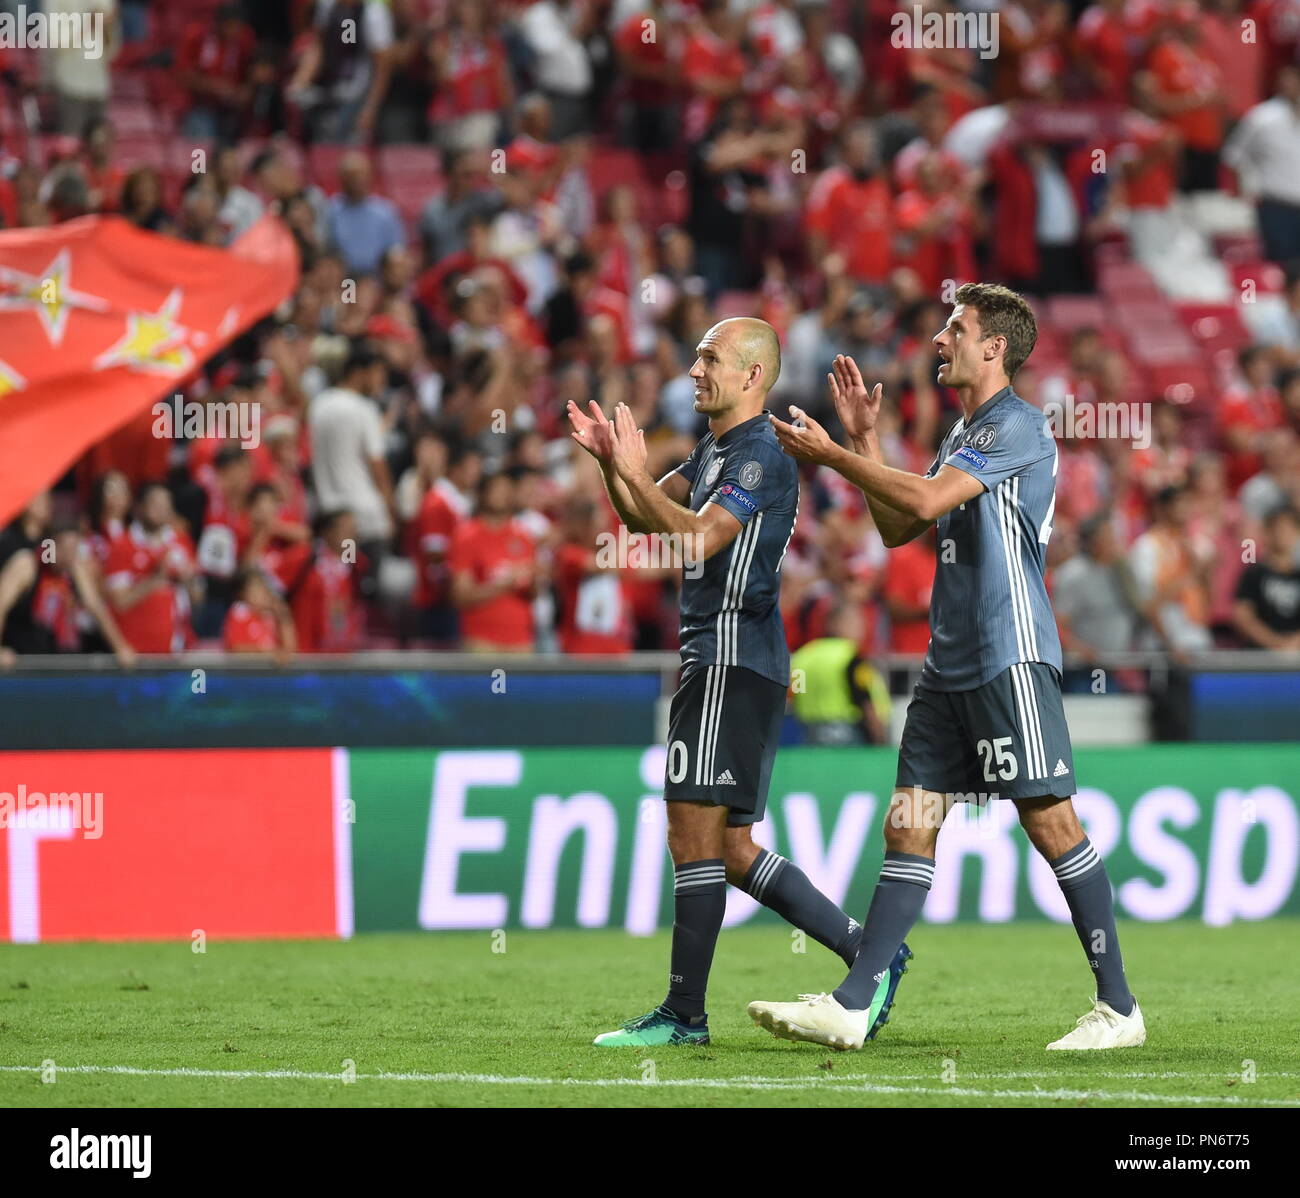 Lisbon, Portugal. 19th Sep, 2018. Players of Bayern celebrate after the UEFA Champions League Group E match between between SL Benfica and FC Bayern Munchen at Luz Stadium in Lisbon, Portugal, on Sept. 19, 2018. Bayern won 2-0. Credit: Zhang Yadong/Xinhua/Alamy Live News Stock Photo